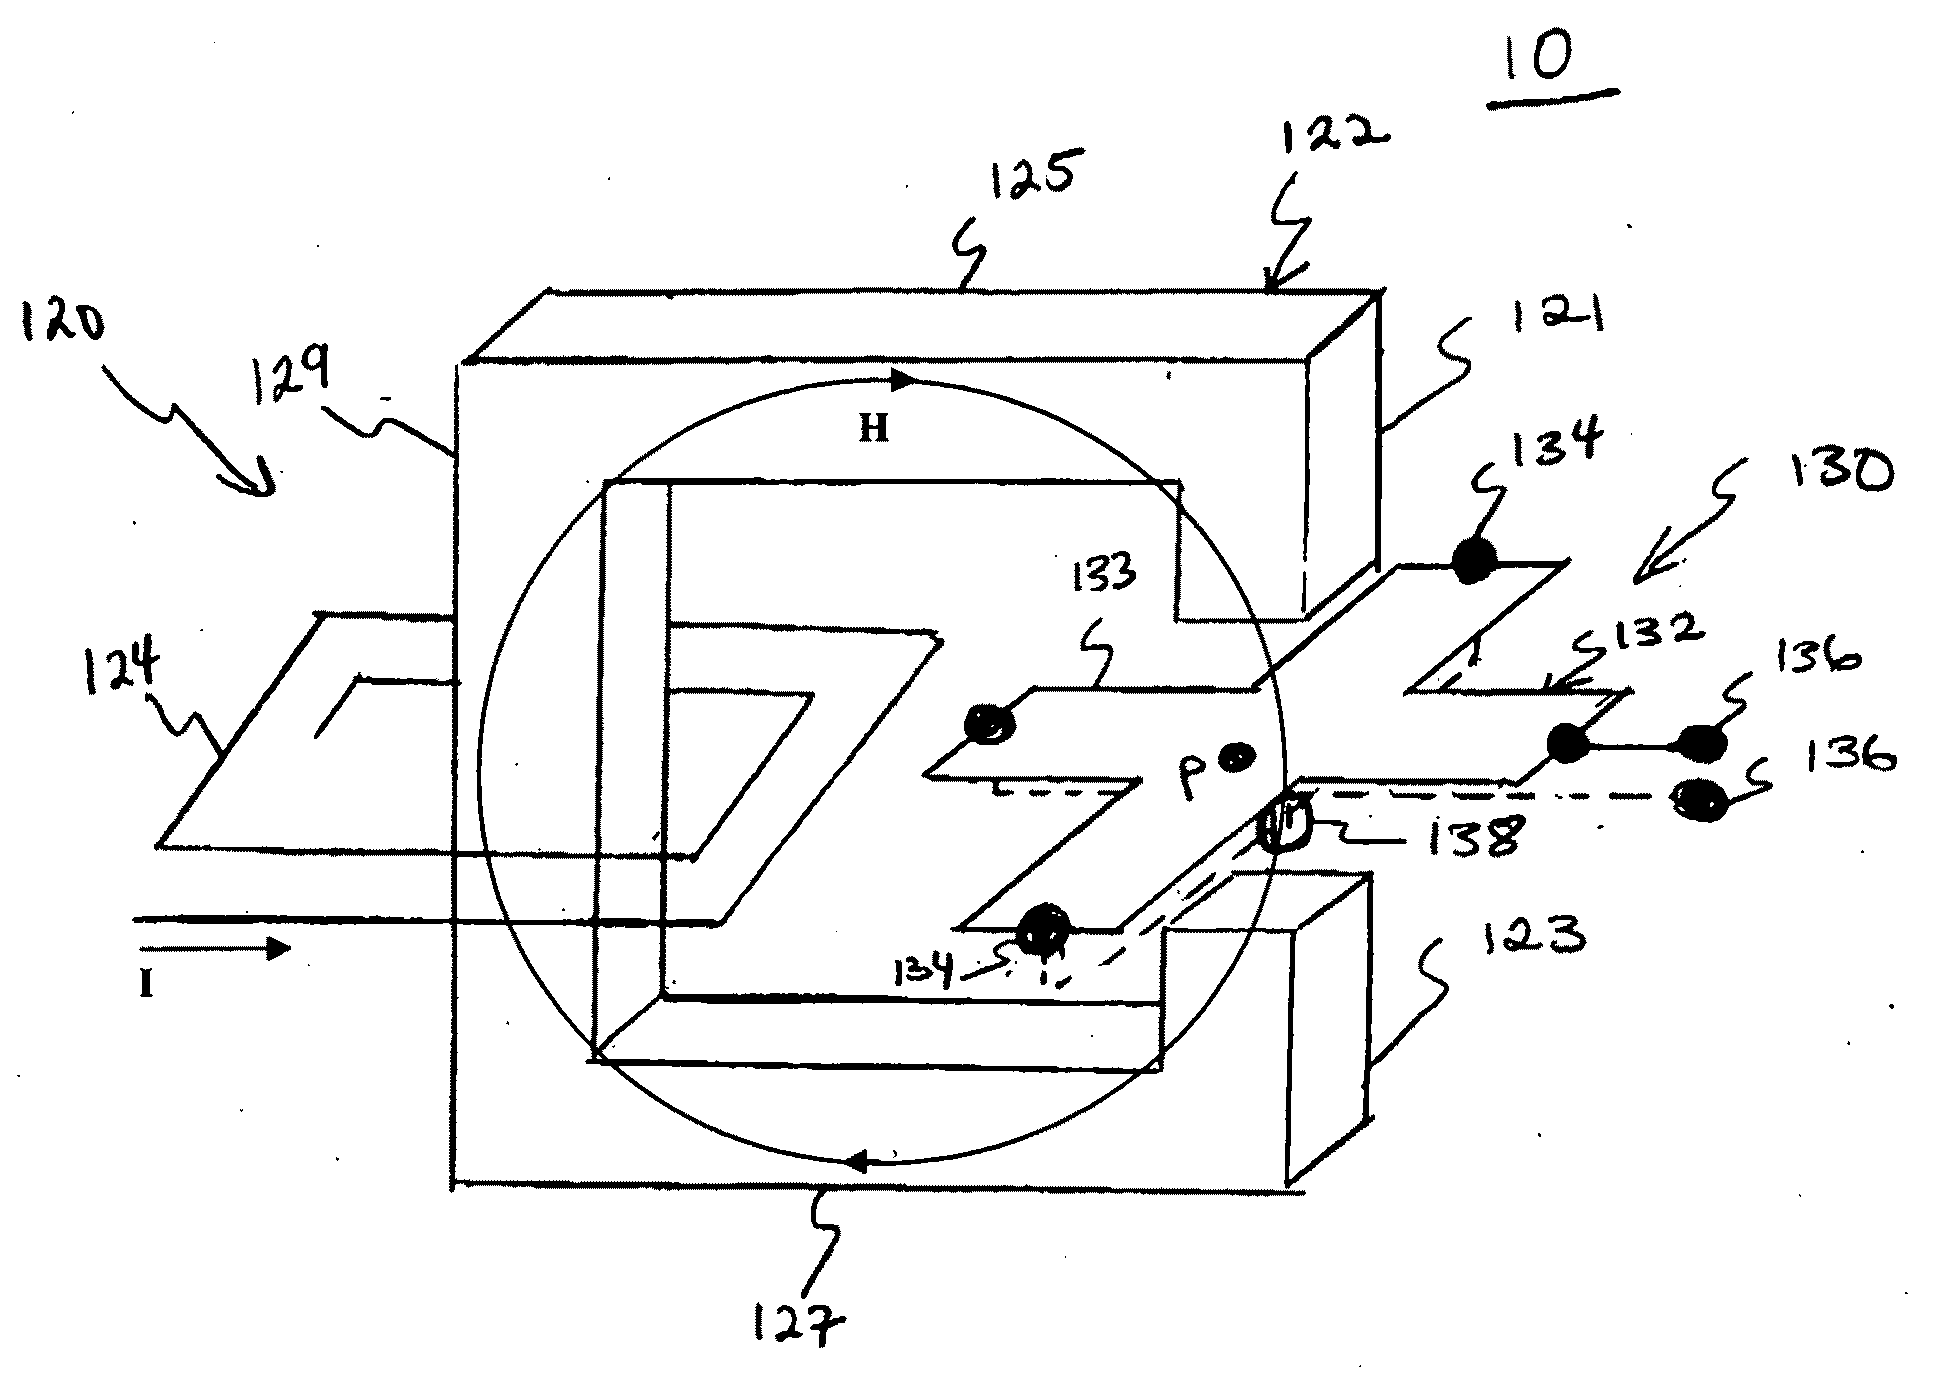 Magnetic memory device having a C-shaped structure and method of manufacturing the same